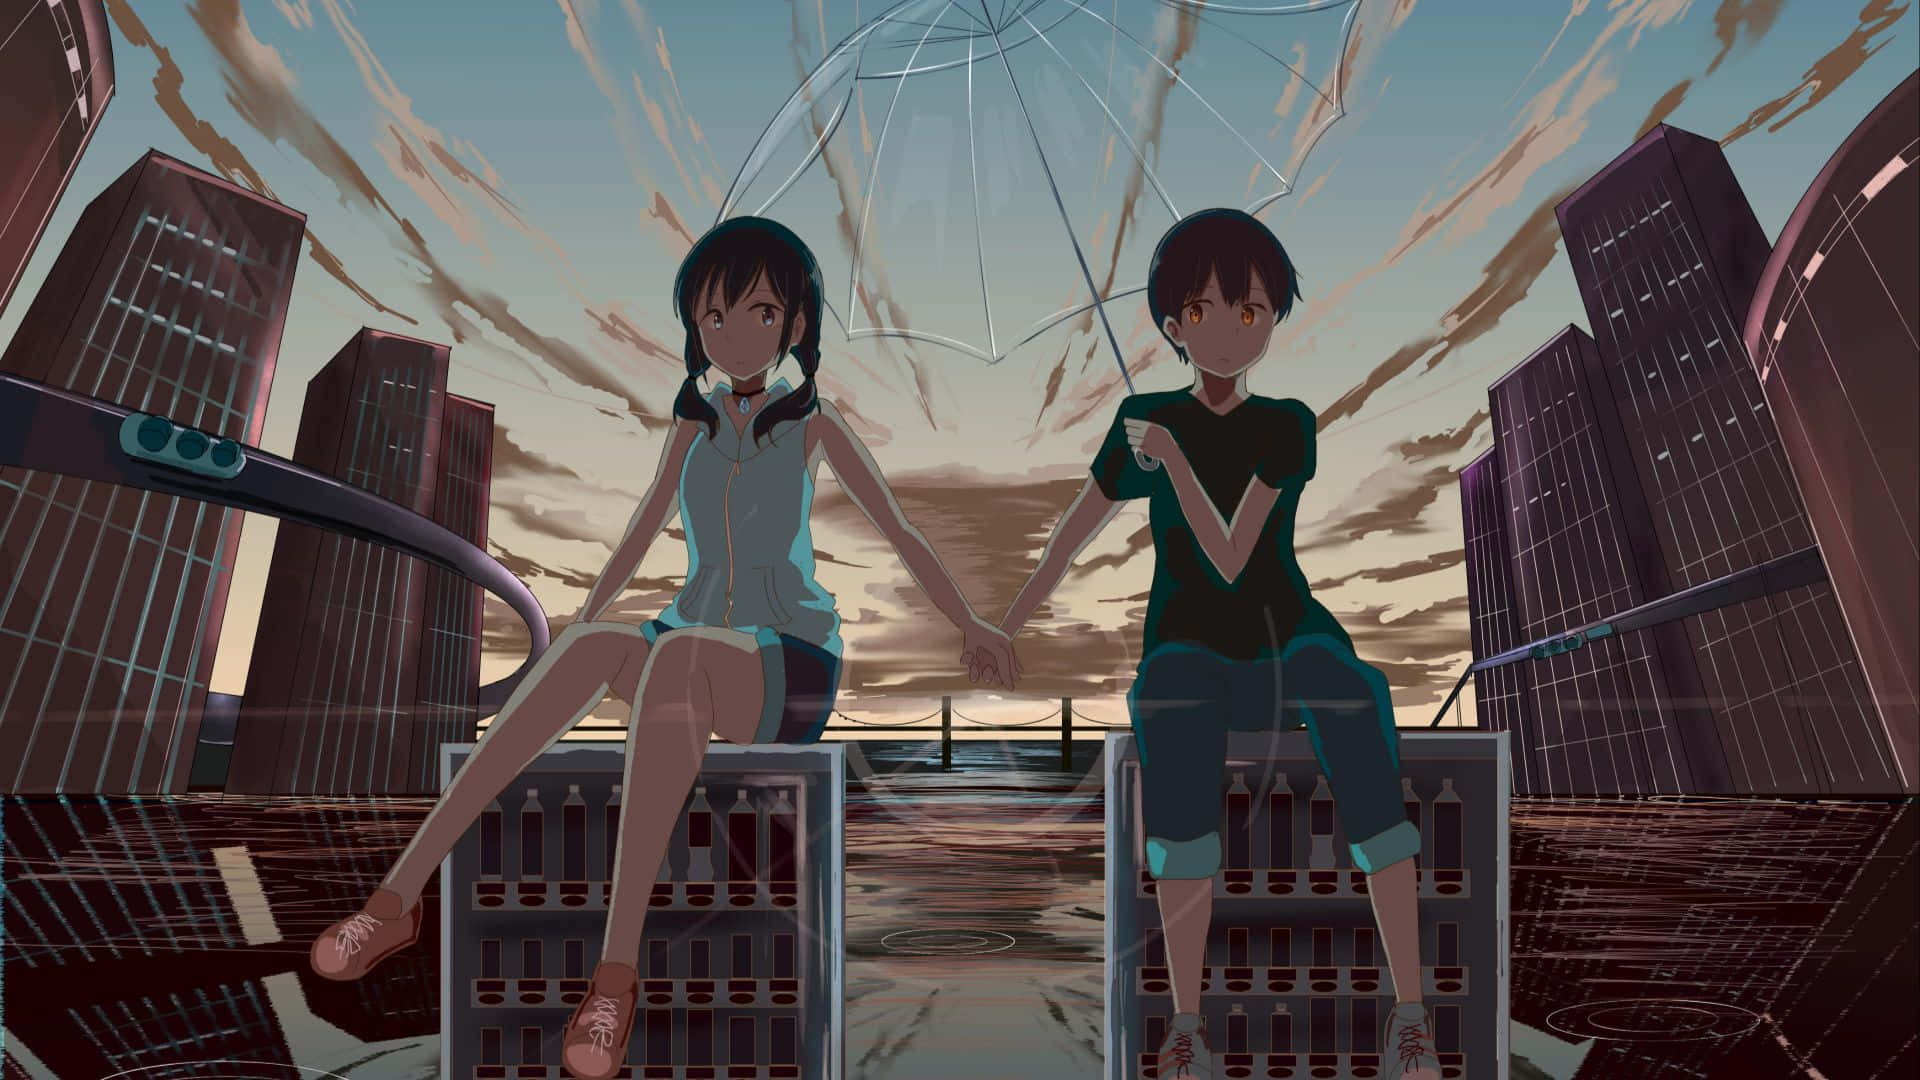 Protagonists Hodaka and Hina brave the challenges of their lives in Weathering With You